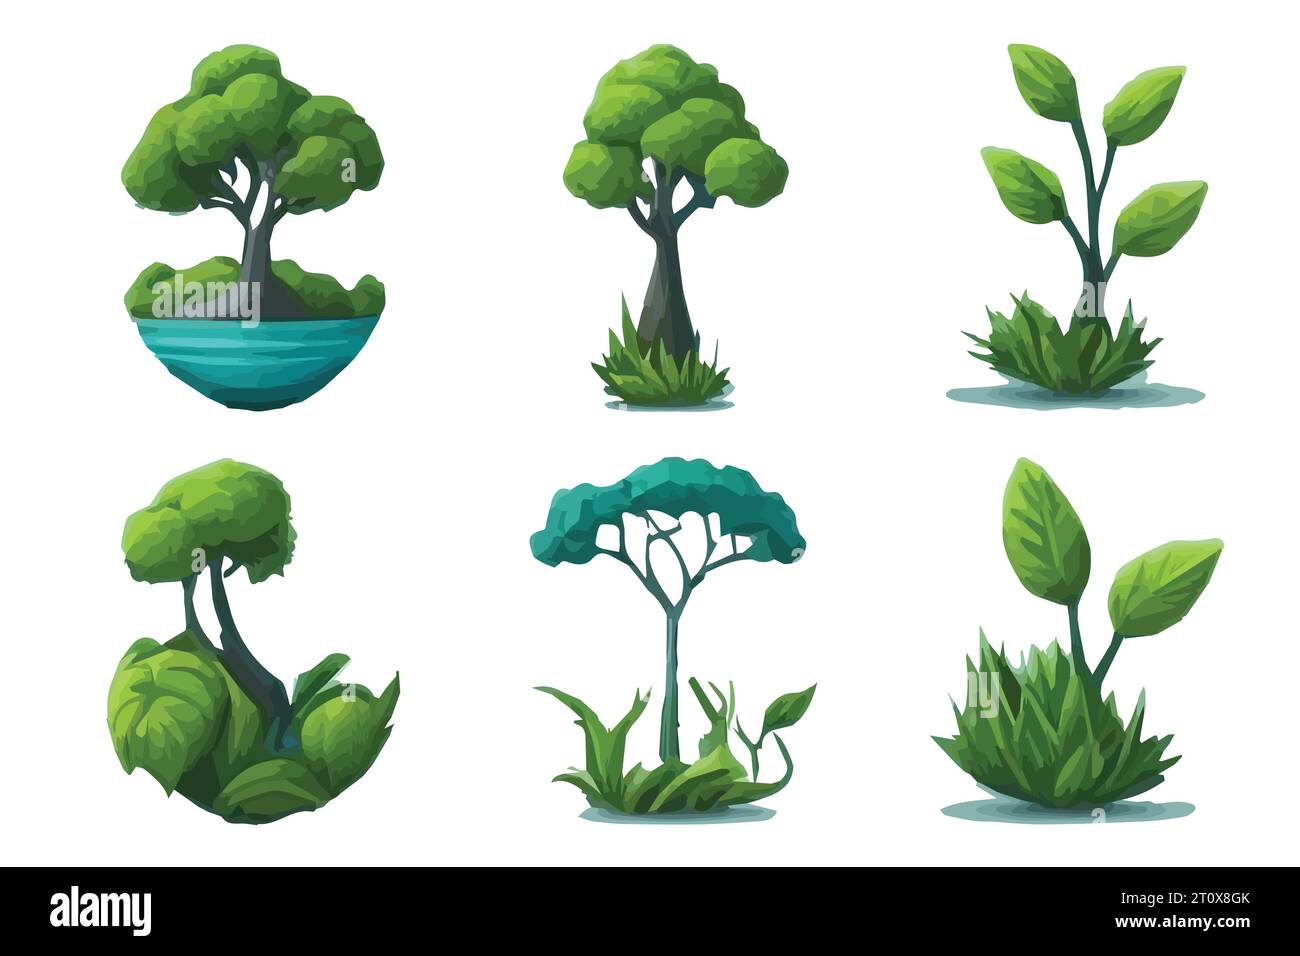 A collection of cartoon shrubs and trees Stock Vector